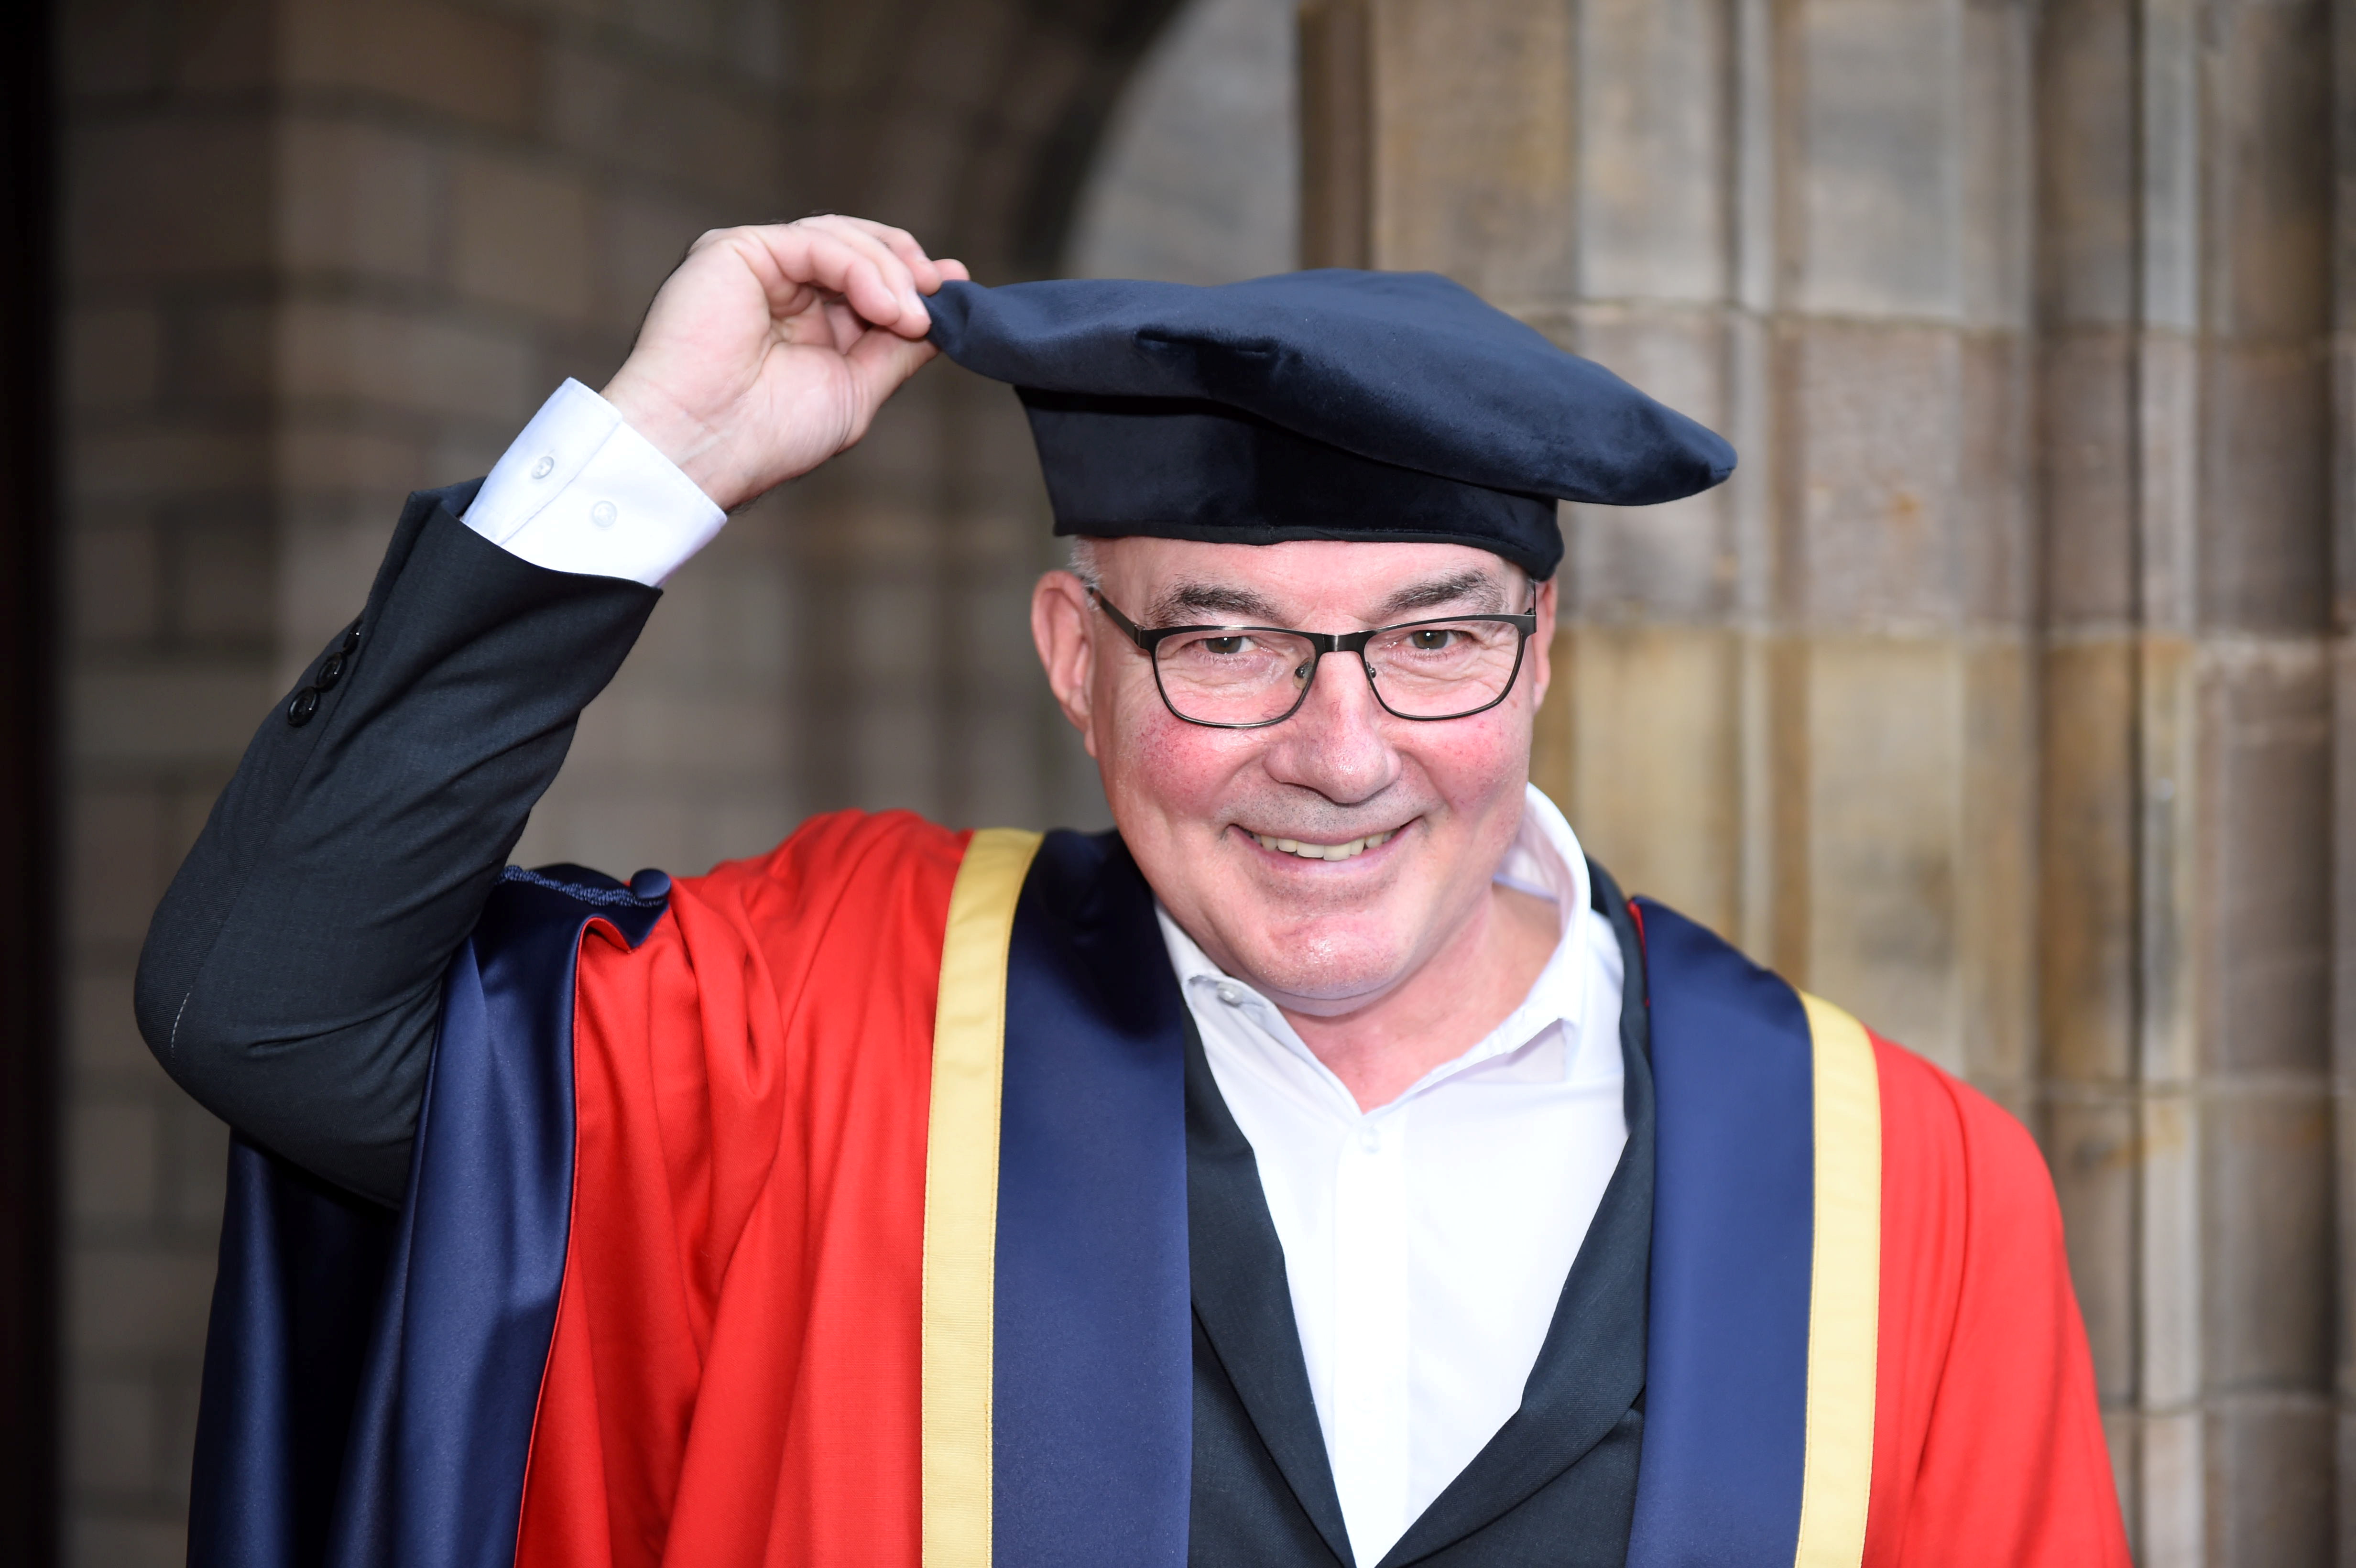 Willie Miller who received his honorary degree at University of Aberdeen's Elphinstone Hall. Picture by Paul Glendell.